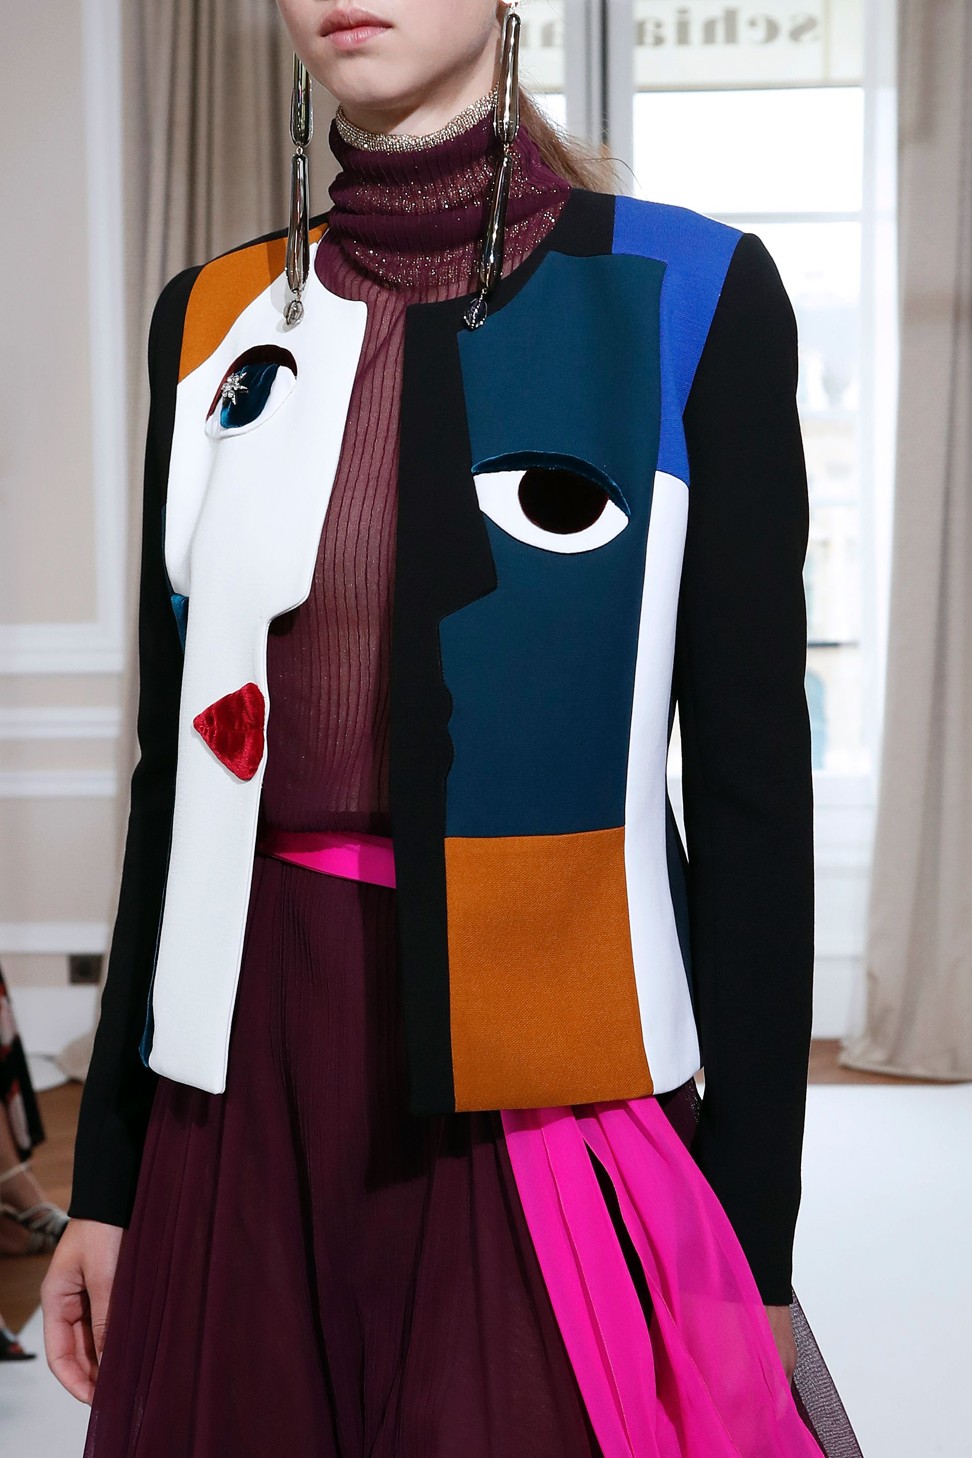 A Picasso-style profile jacket from Schiaparelli’s 2017-18 autumn/winter haute couture collection. Photo: AFP